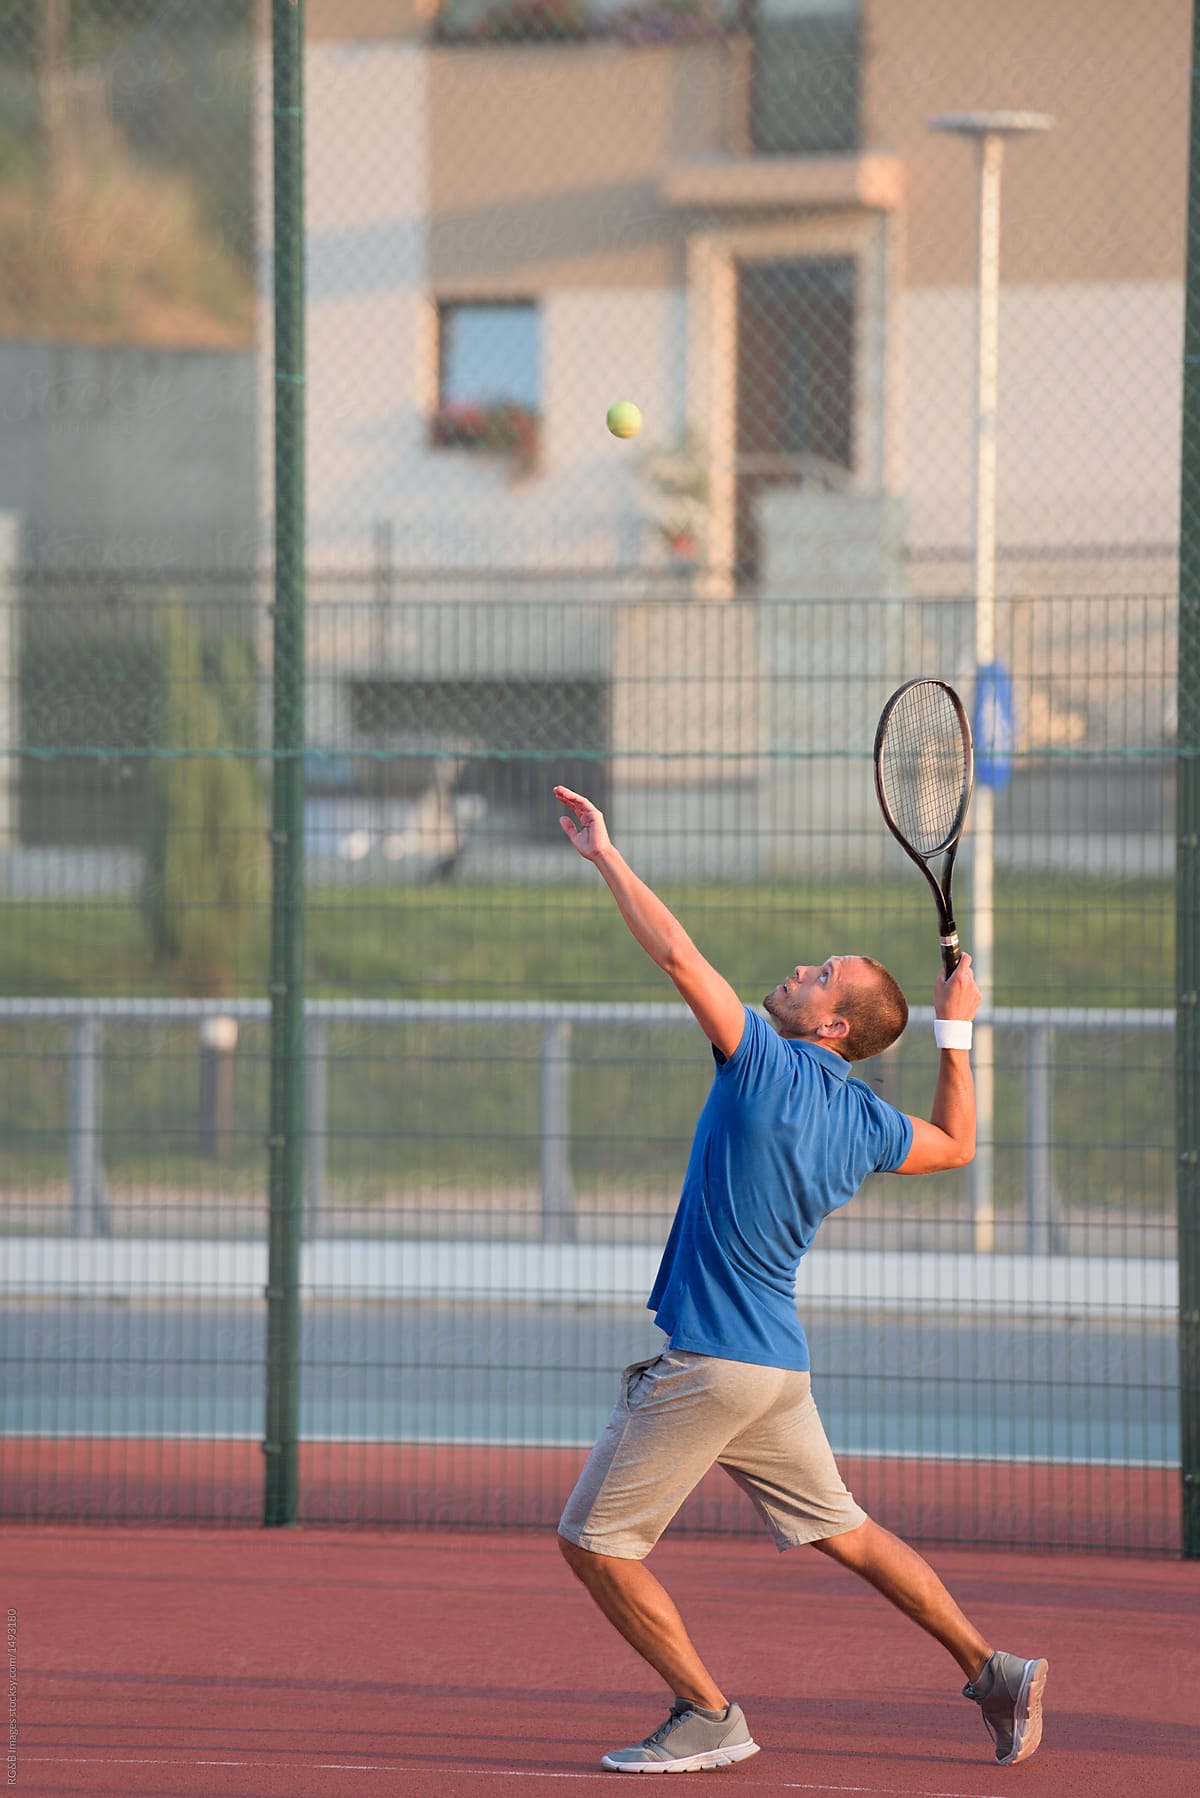 Man serving while playing tennis outdoor on clay court